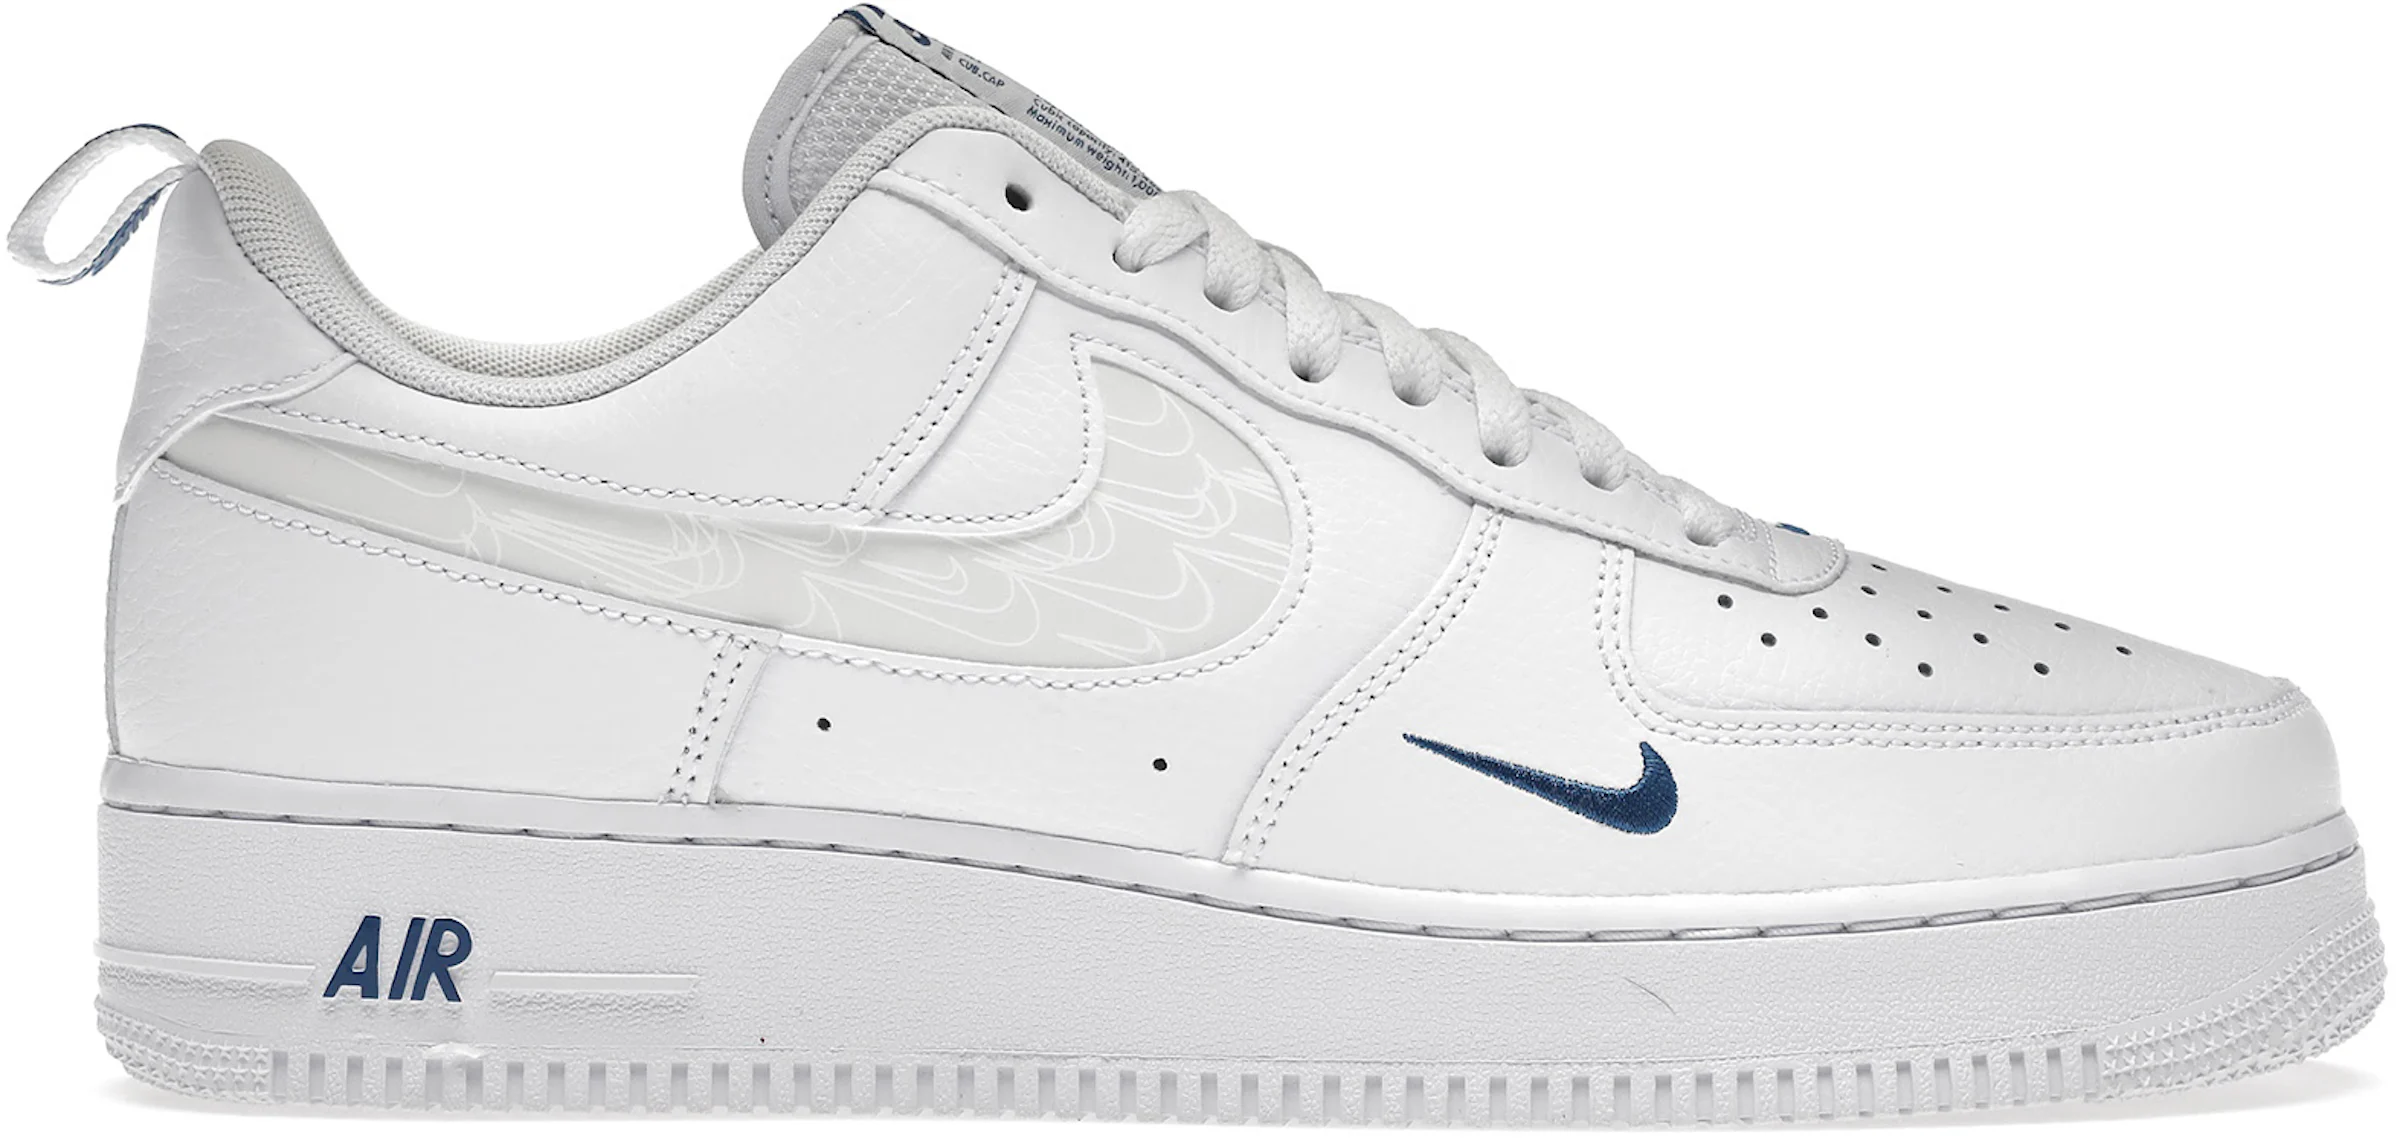 Nike Air Force 1 Low Reflective Swoosh White Blue Men's - FB8971